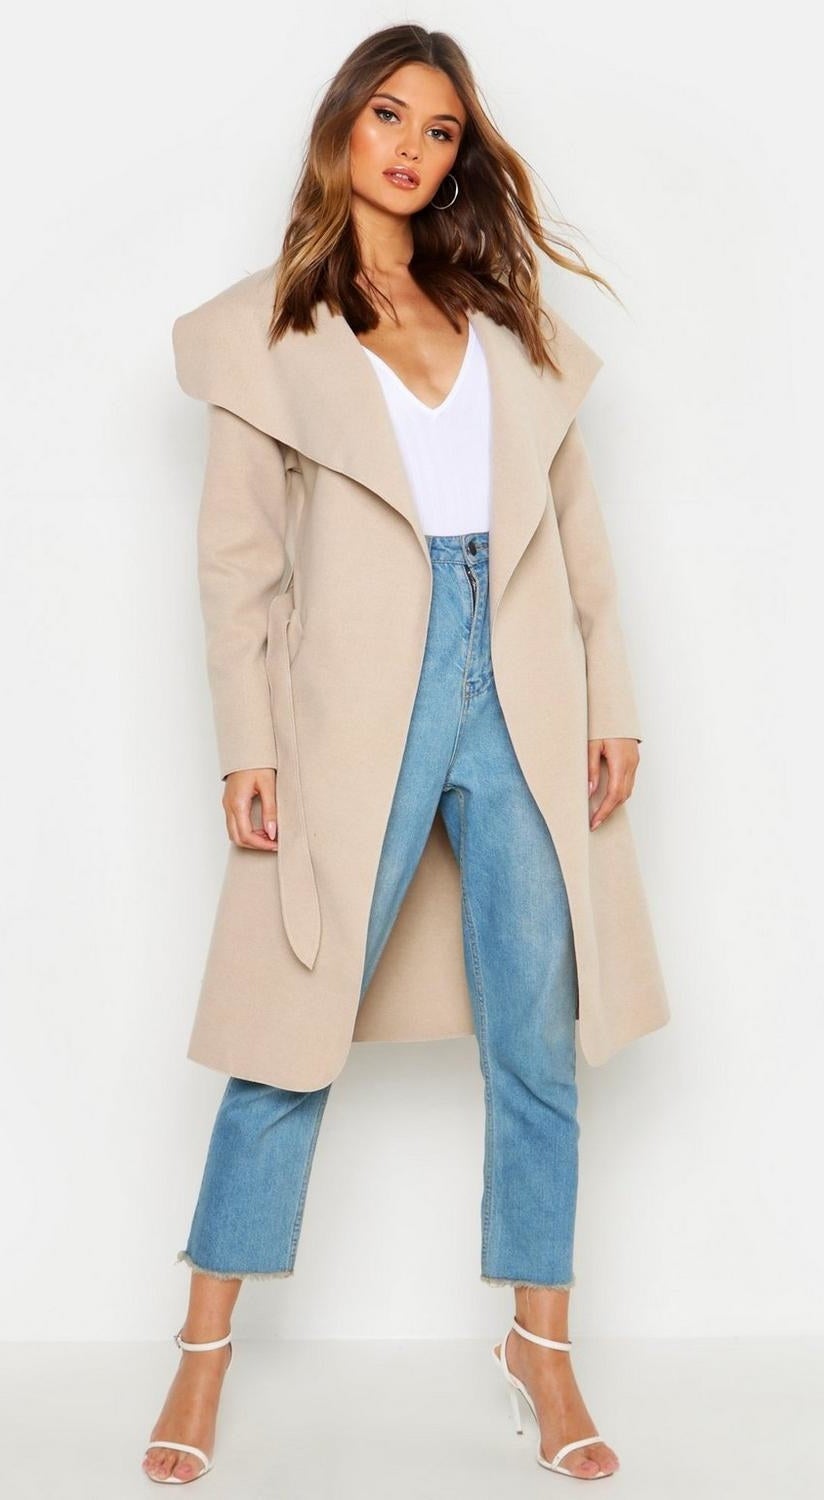 32 Fall Fashion Items That Look Expensive